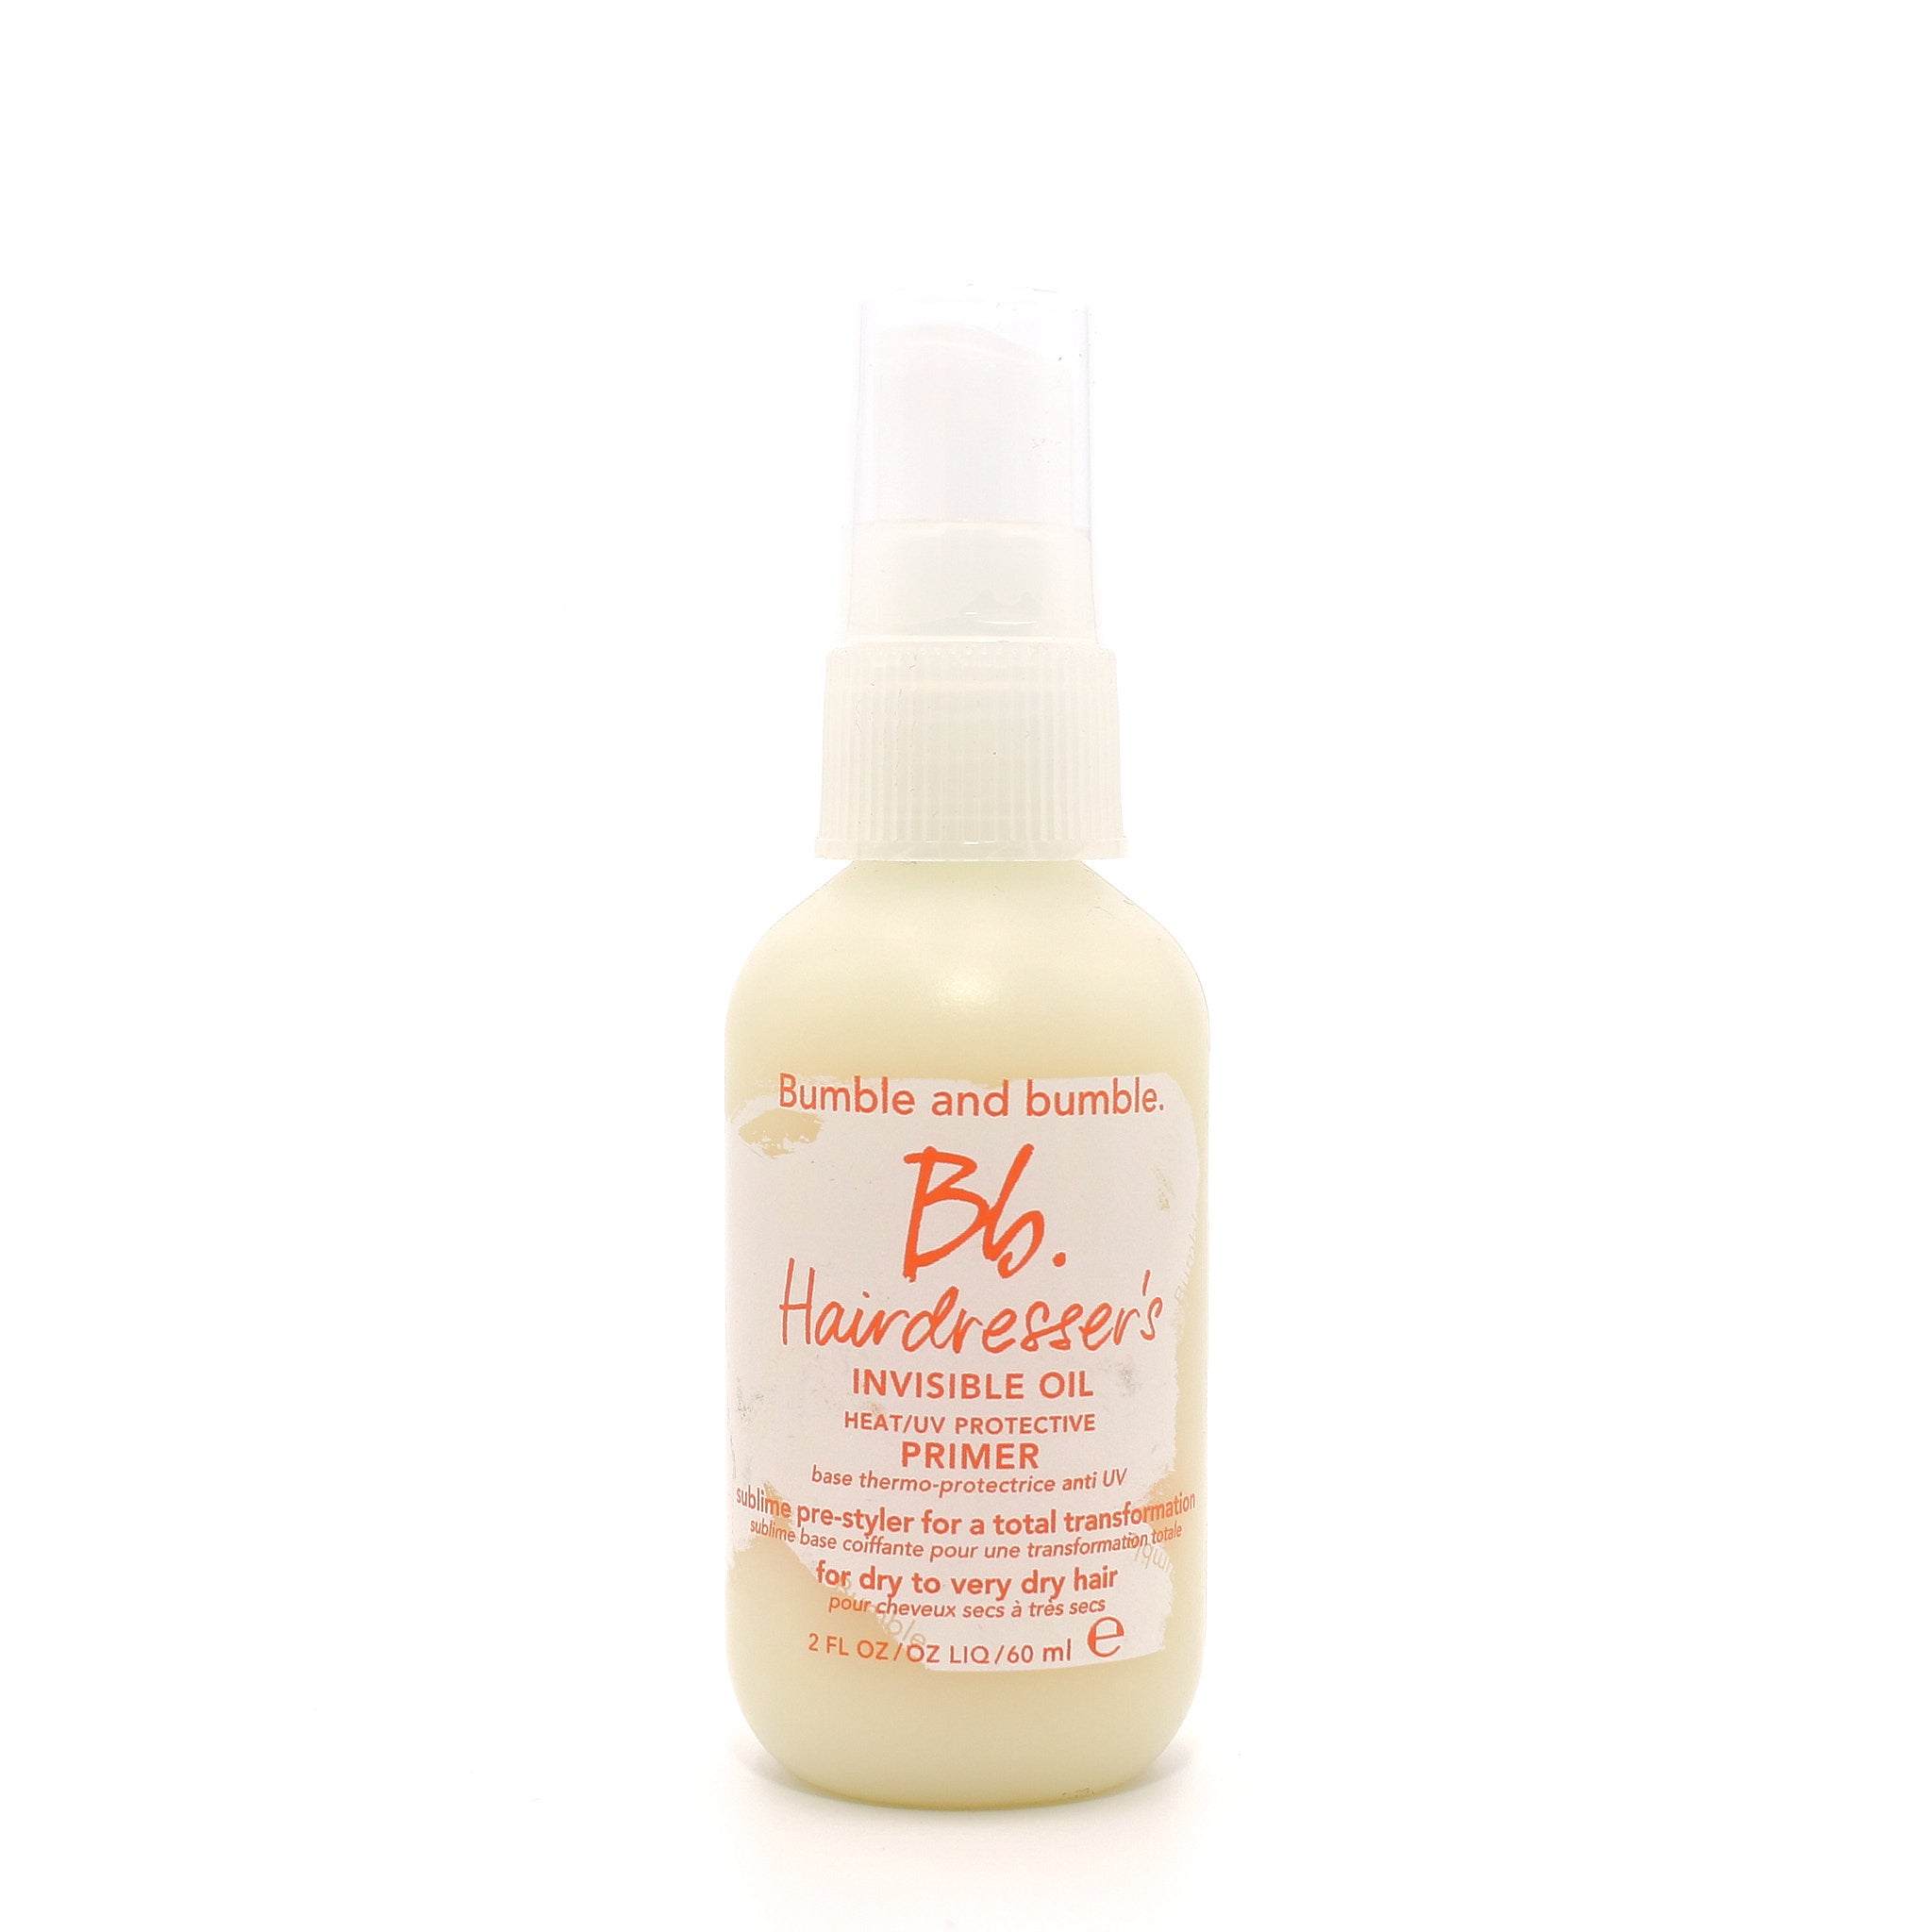 Bumble and bumble Bb Hairdressers Invisible Oil Primer 2 oz